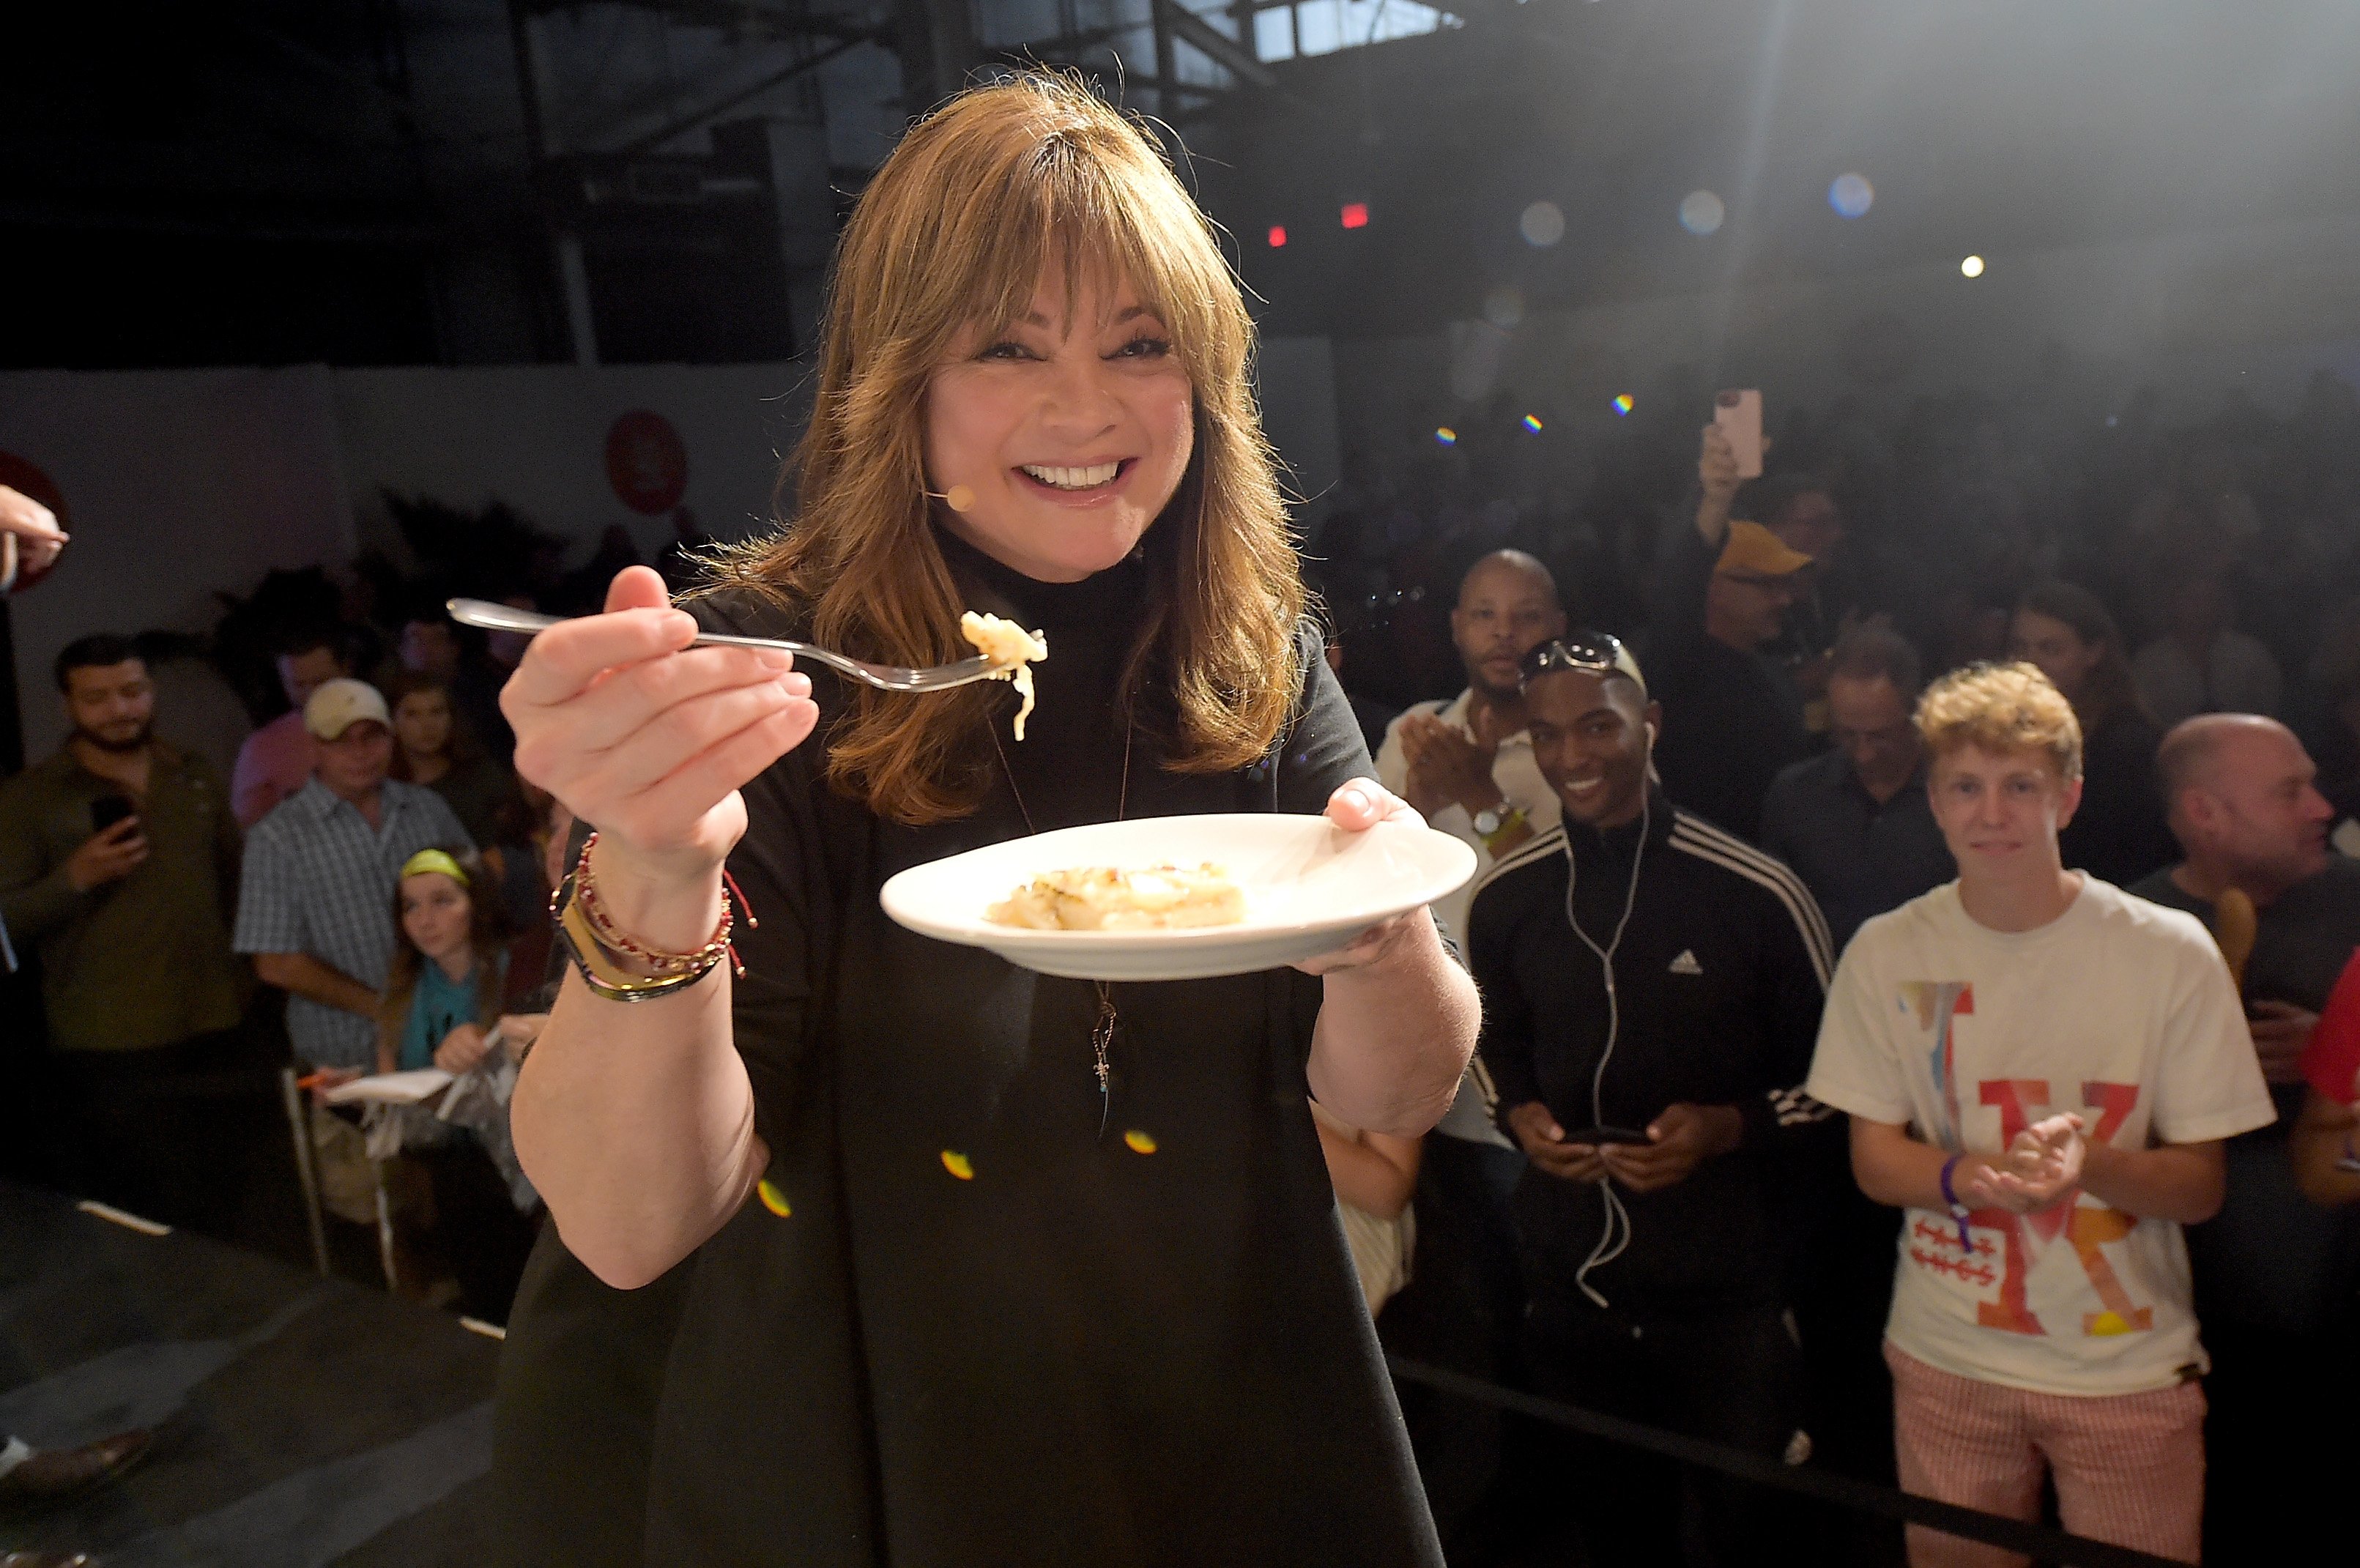 Valerie Bertinelli offers the camera a bite off her plate of food while an audience looks on at the 2017 Cooking Channel New York City Wine & Food Festival